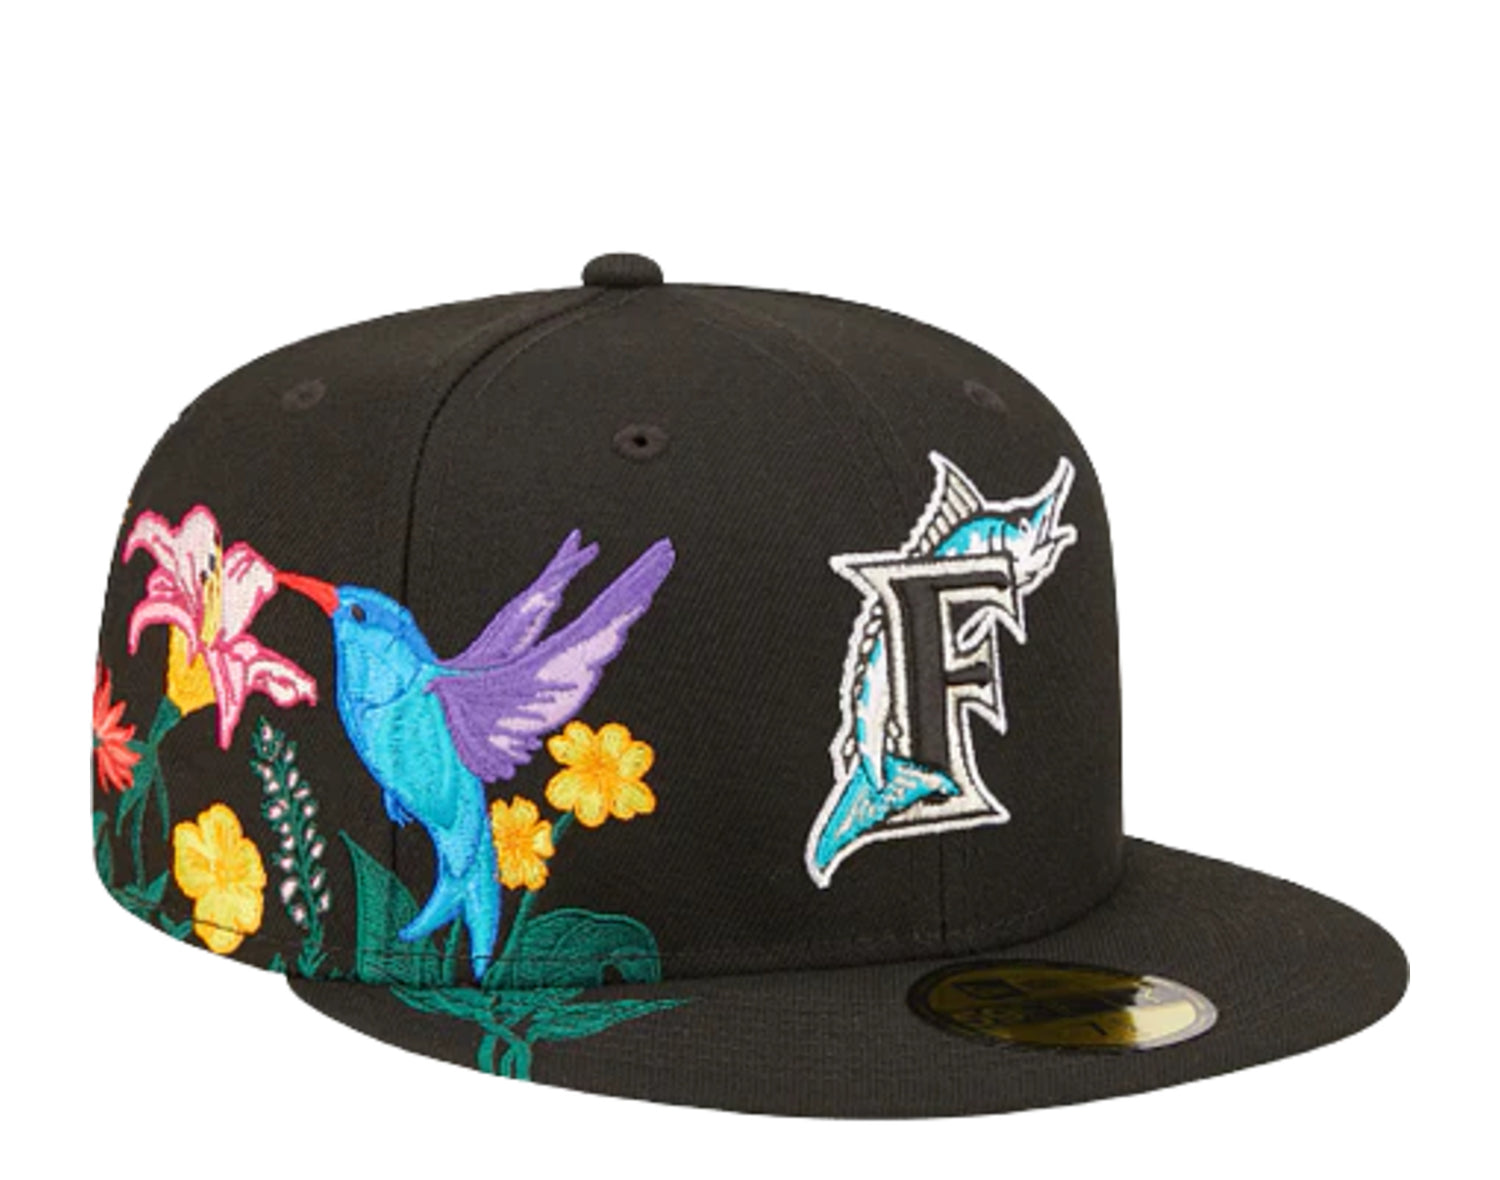 New Era 59Fifty MLB Miami Marlins Blooming Fitted Hat